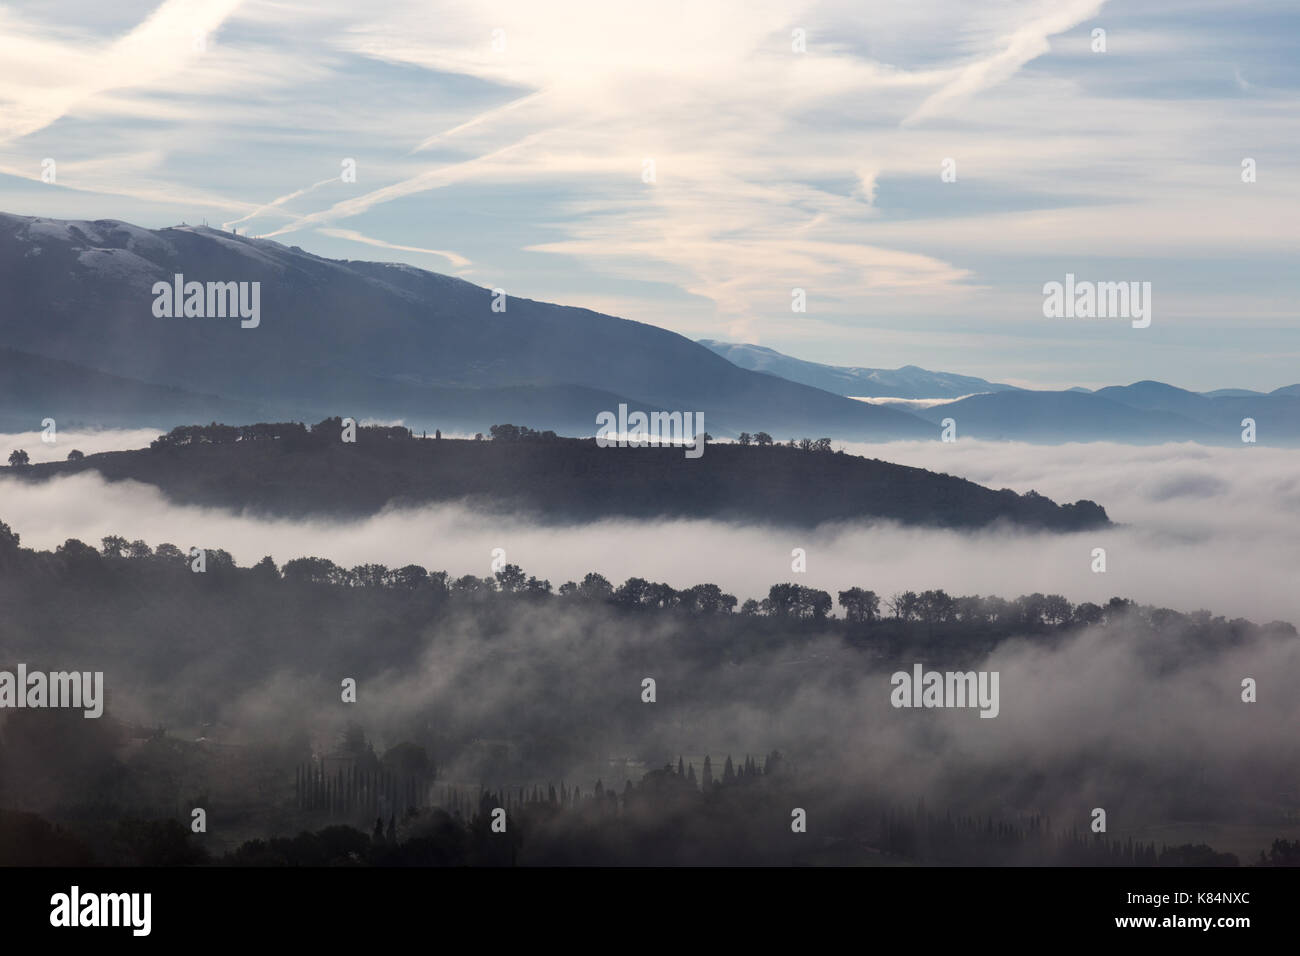 Valley filled by fog with hills and tree emerging from the mist Stock Photo